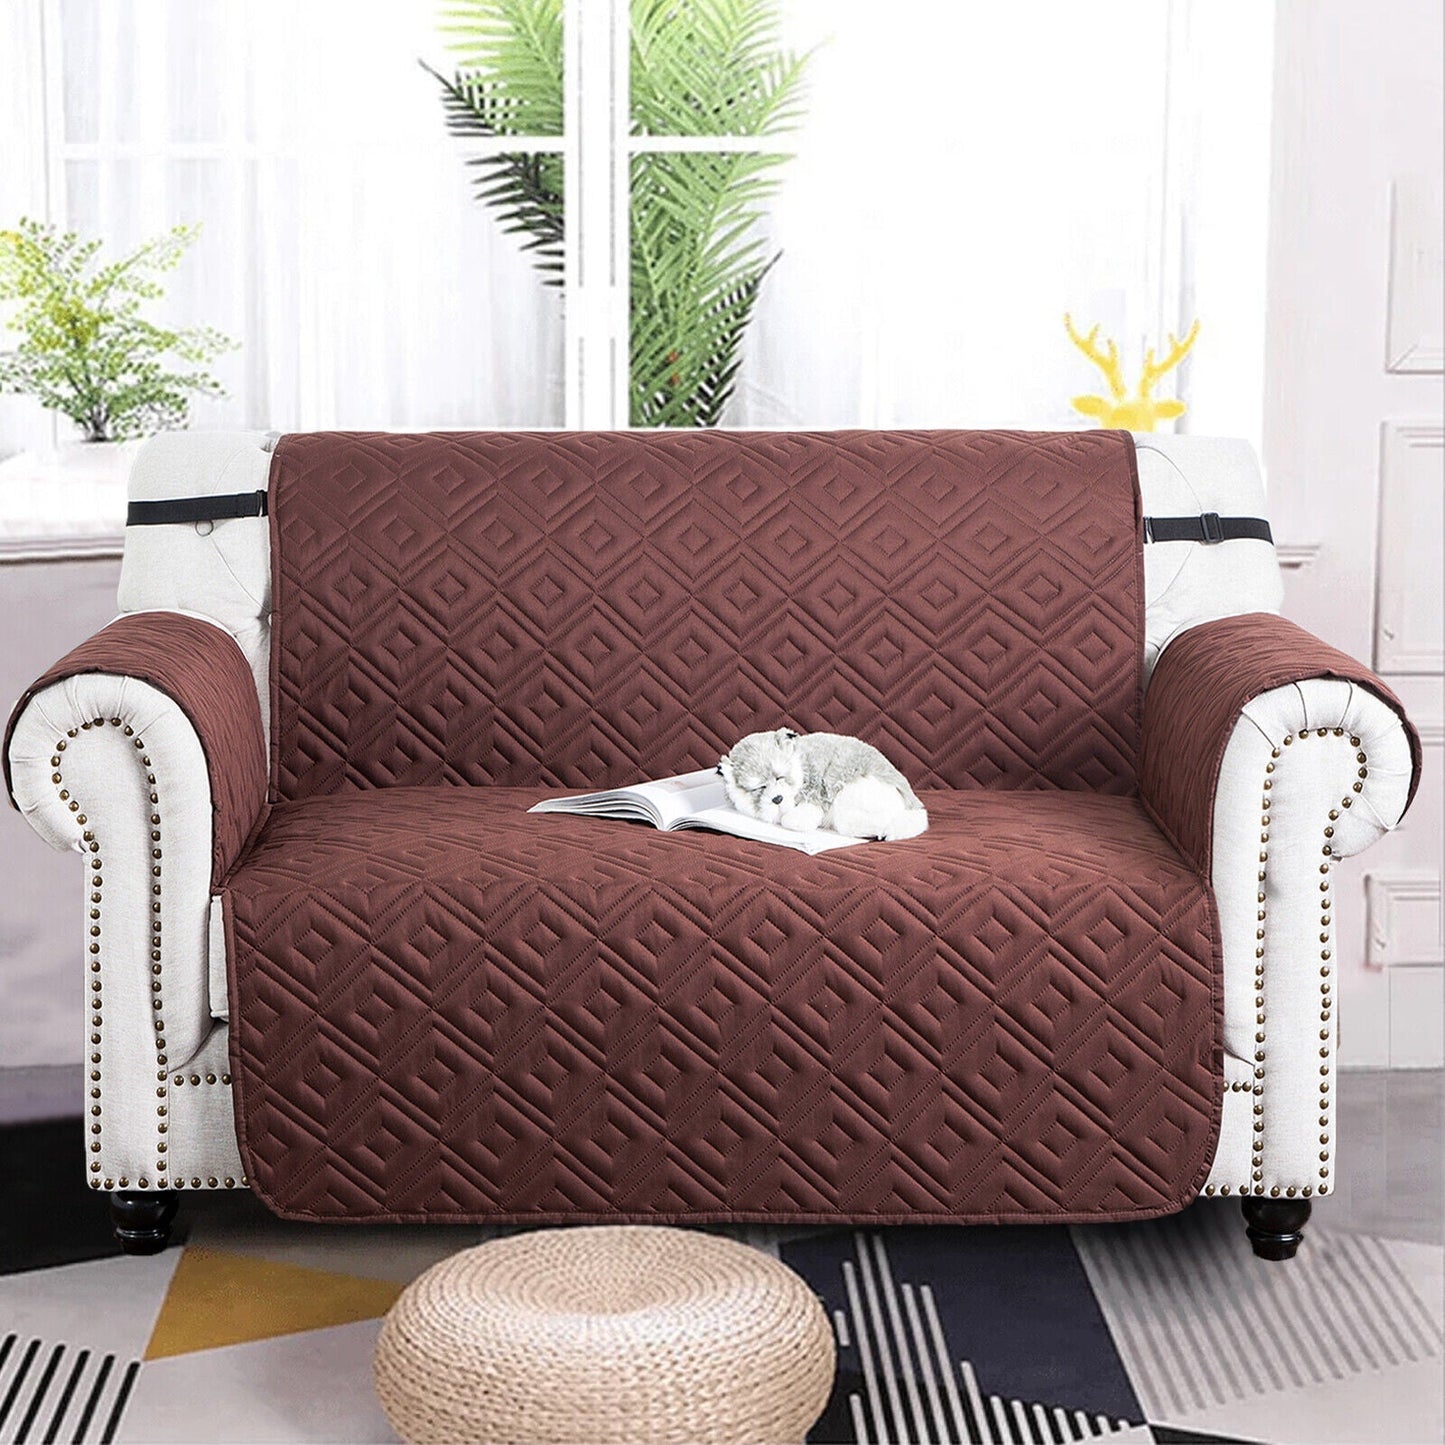 Quilted Sofa Cover Pet Protector Throw Waterproof Sofa Slip Covers 1/2/3 Settee